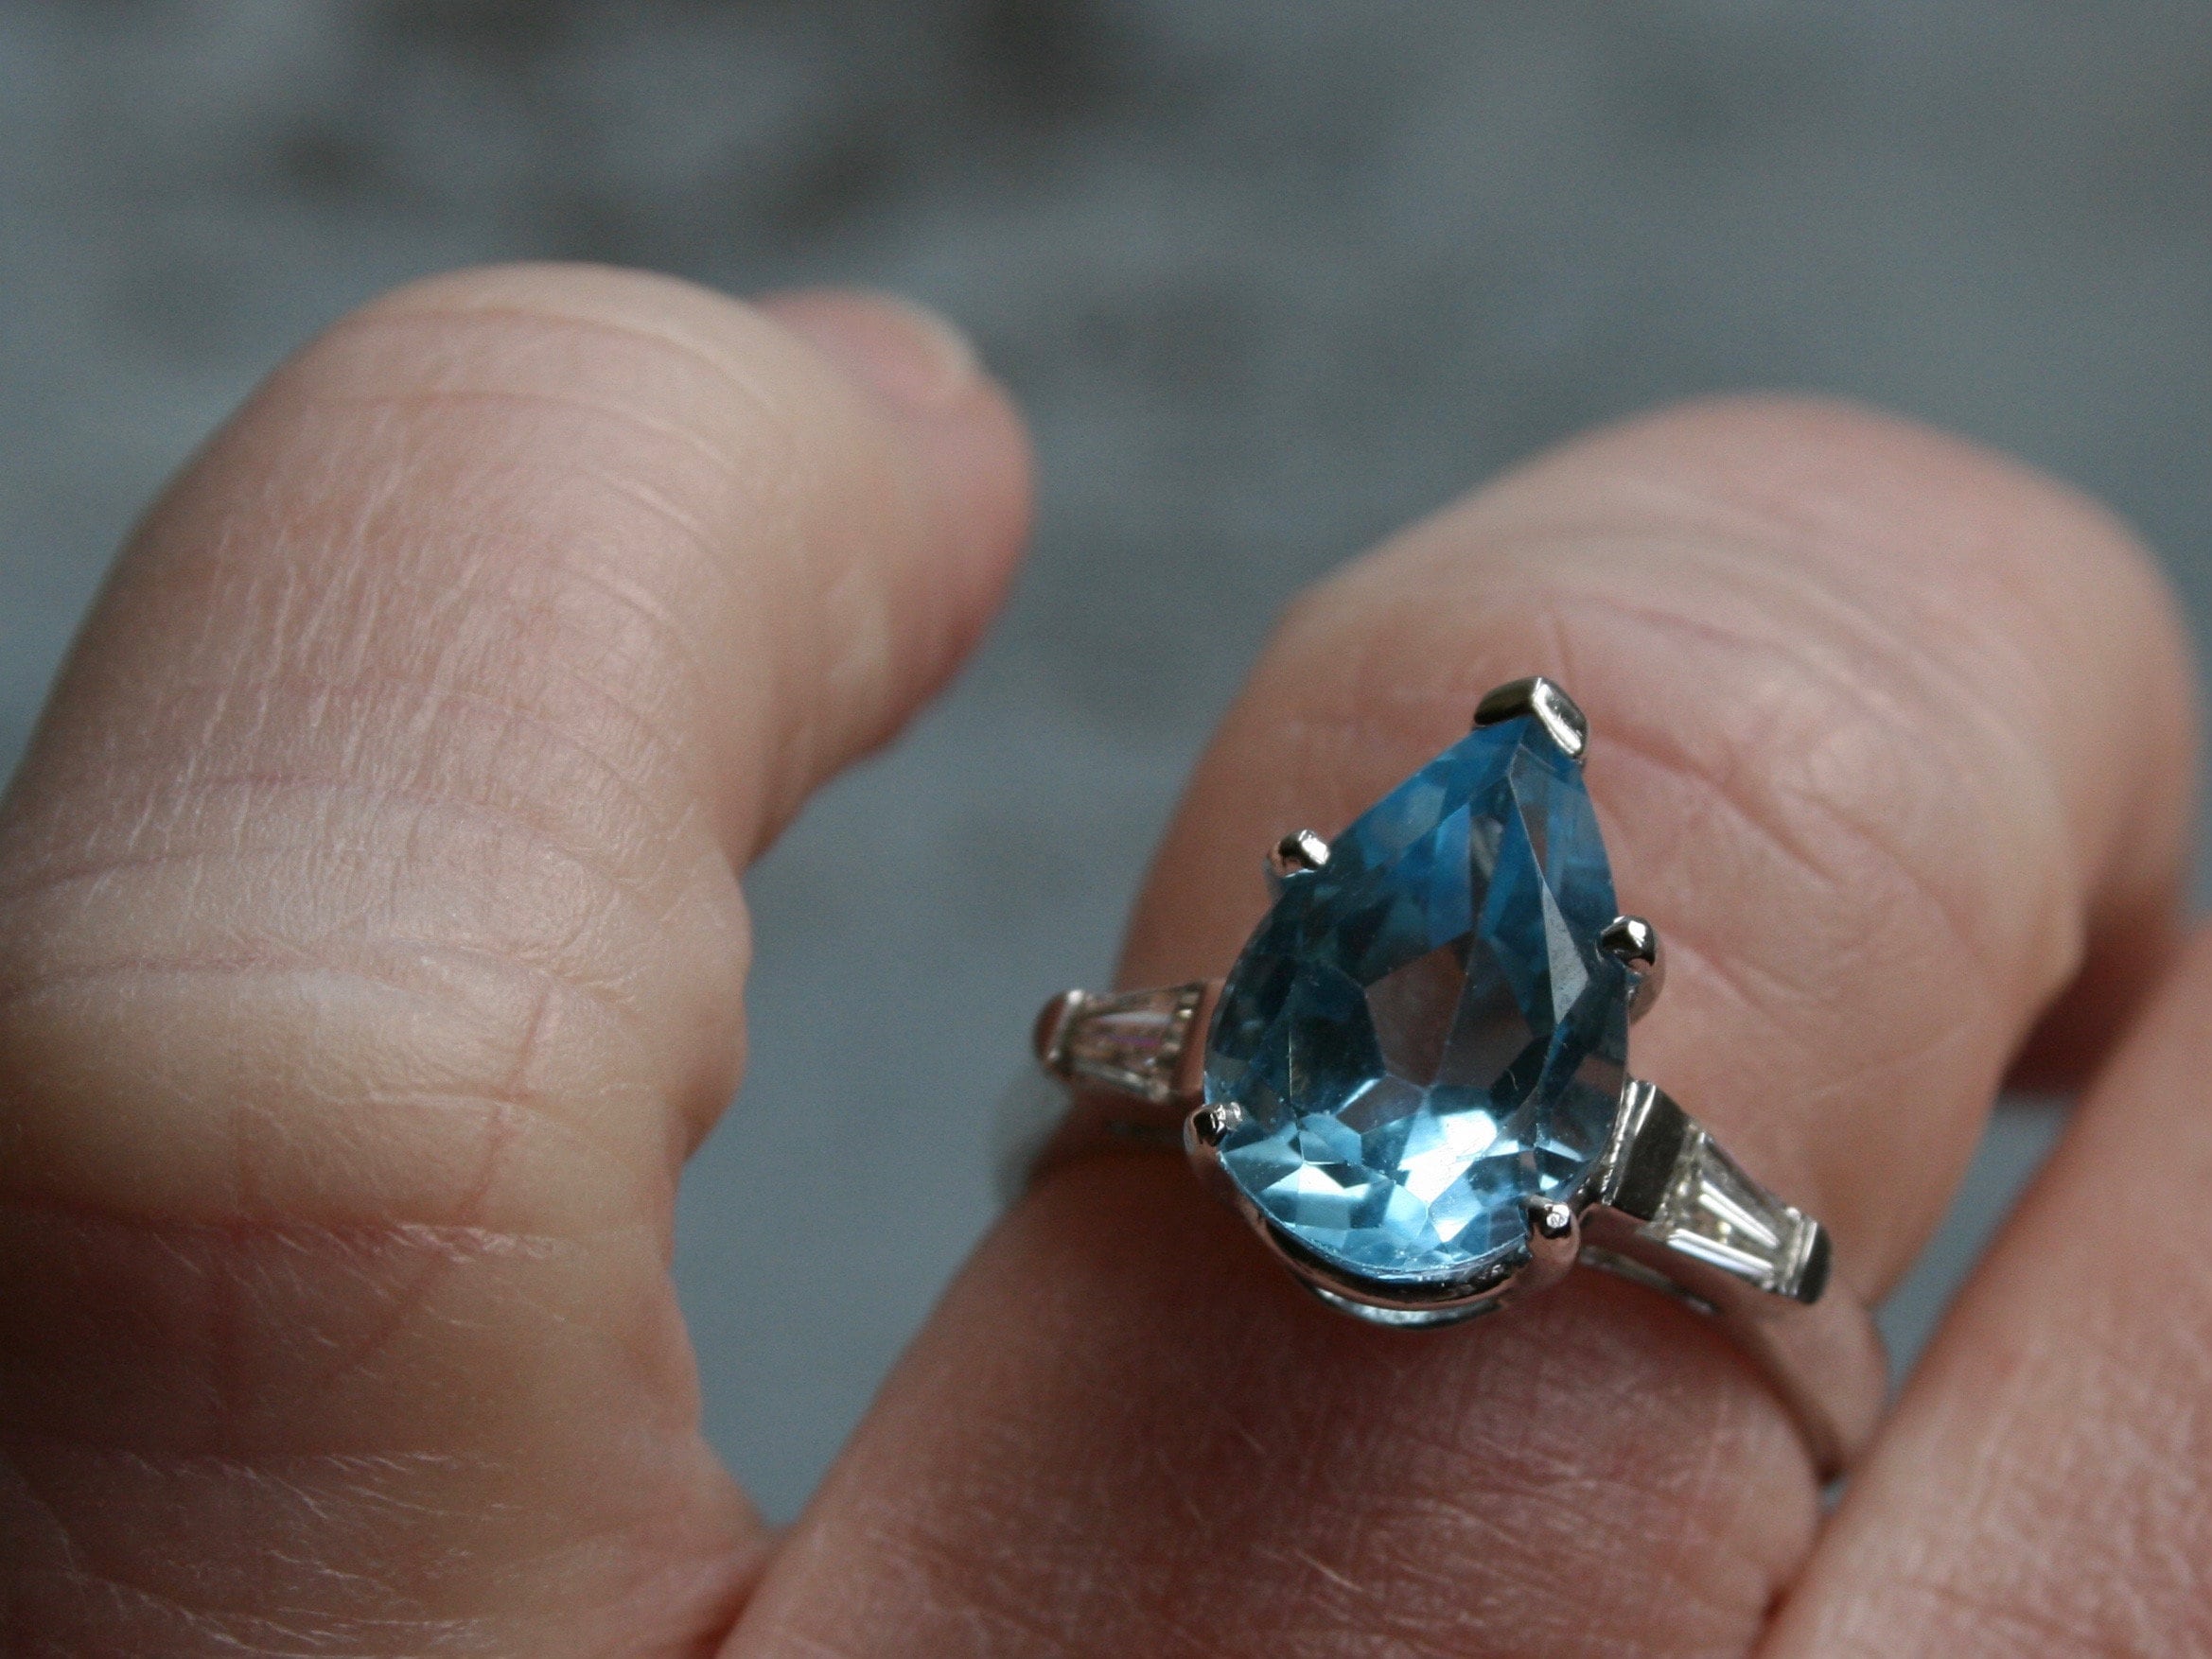 Fantastic Retro Vintage 14K White Gold Blue Topaz Ring with Diamond Accents - 3.95ct.